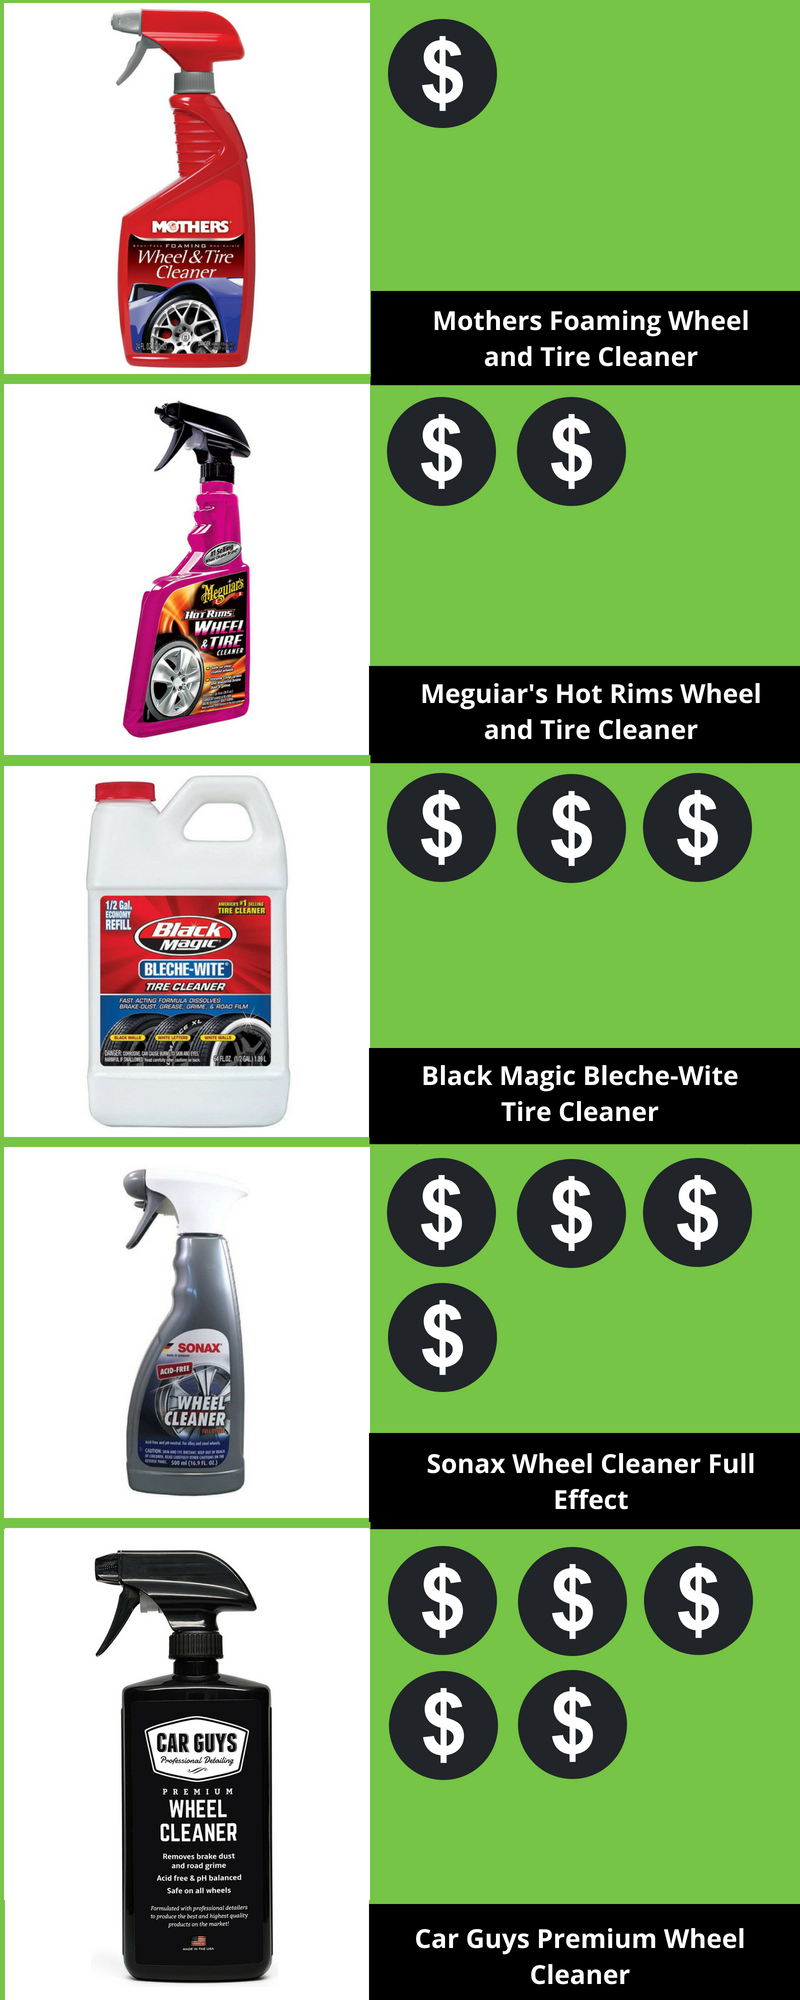 How Much Should a Wheel Cleaner Cost